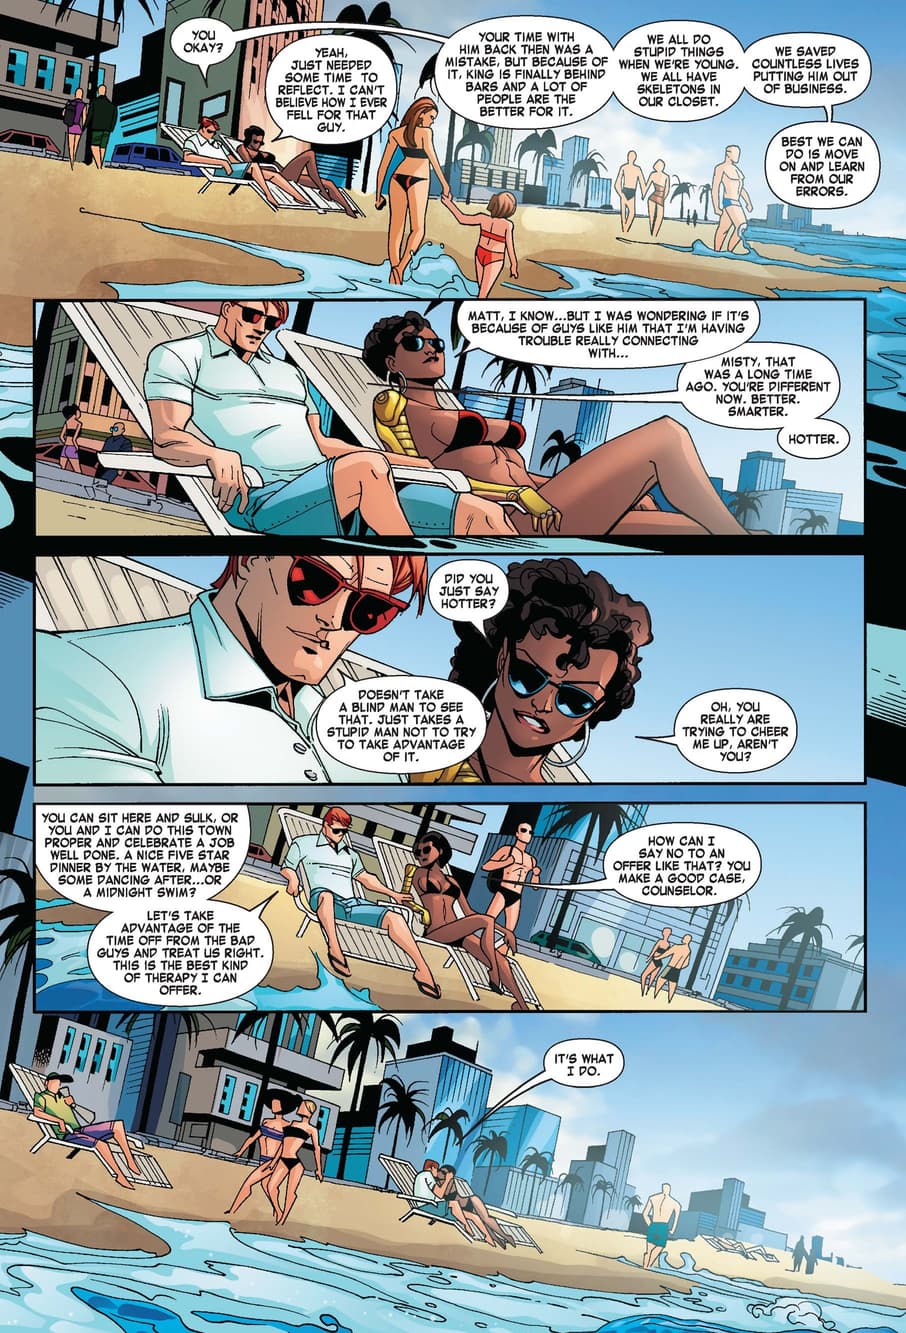 Daredevil and Misty Knight kick back and relax on the beach.